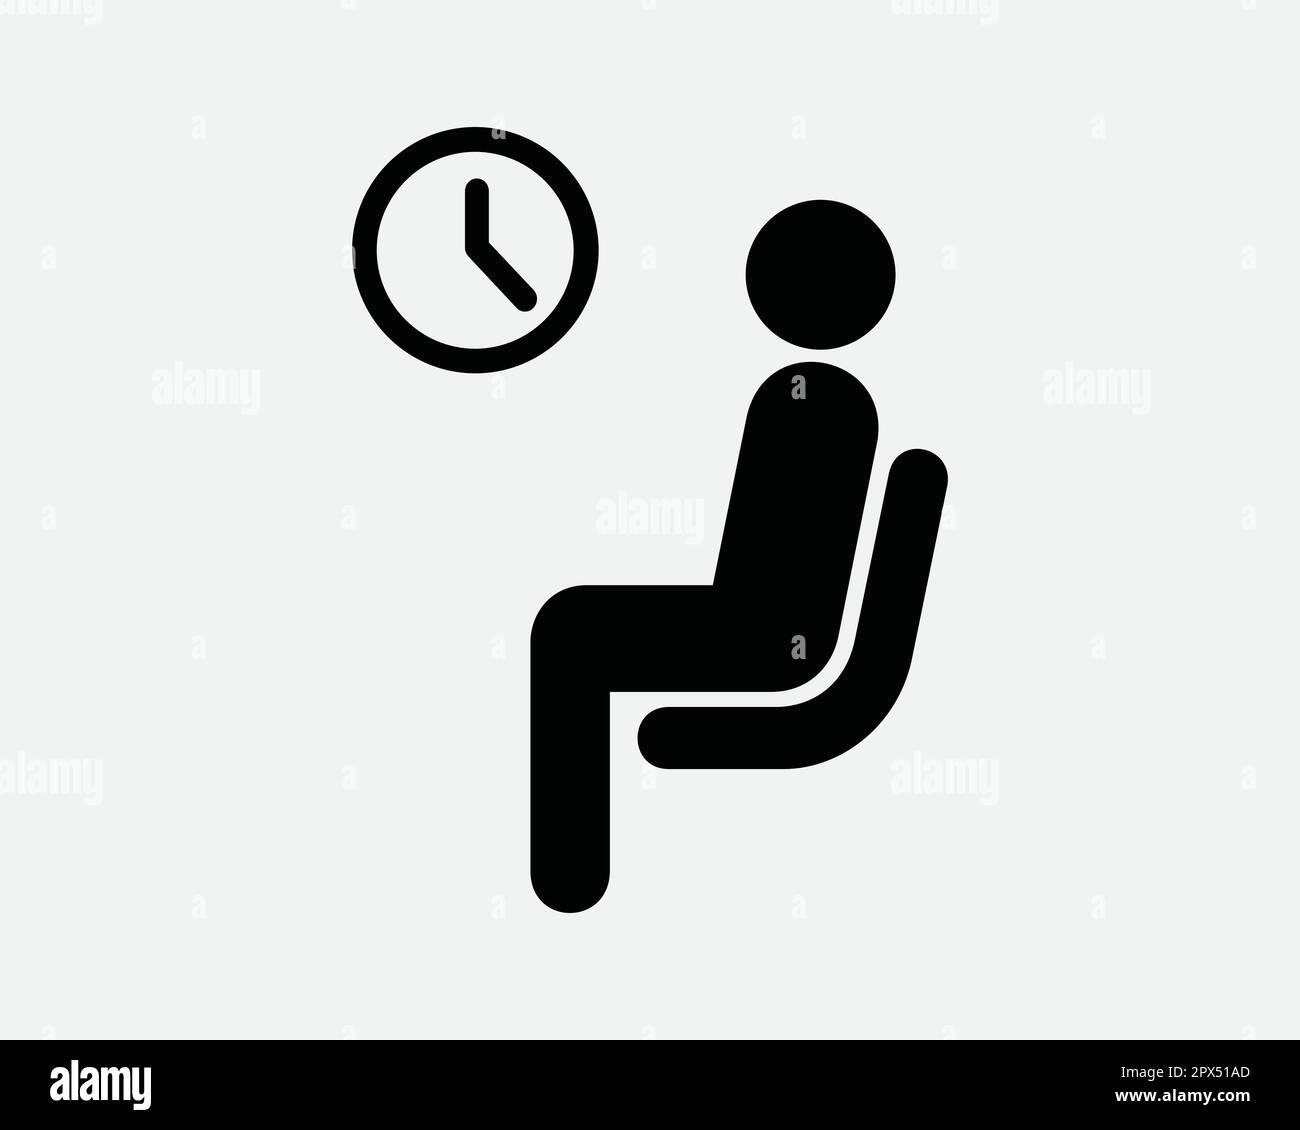 Waiting Room Icon. Man Sit on Chair Lounge Wait Area Airport Hospital Office Patience Sign Symbol Artwork Graphic Illustration Clipart Vector Cricut Stock Vector